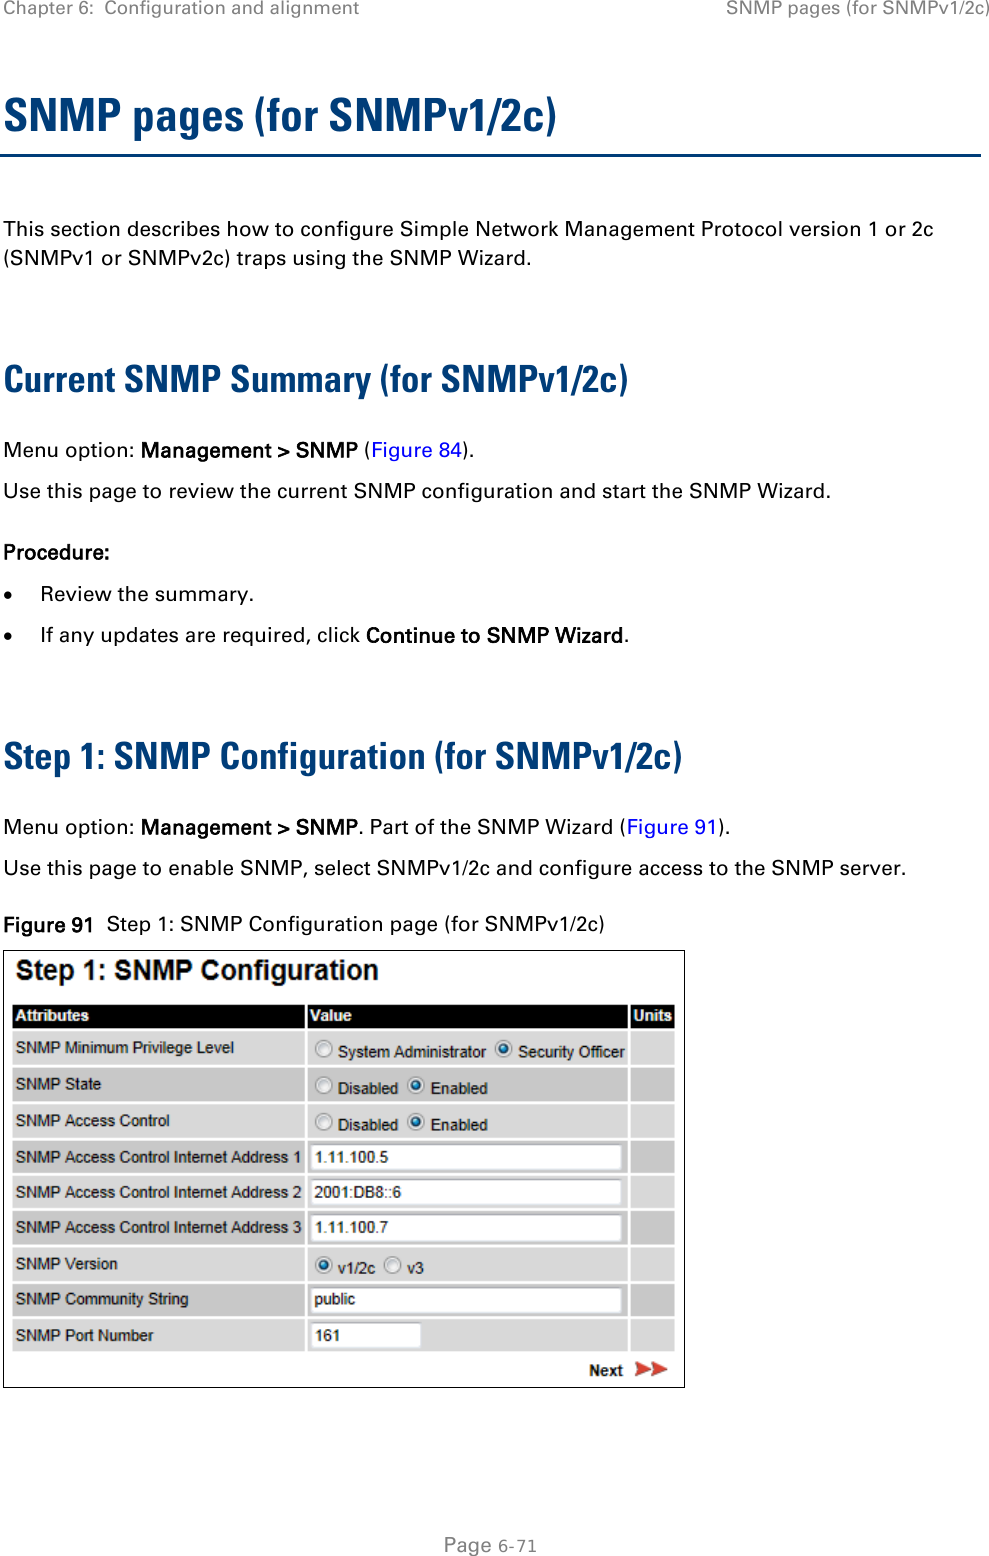 Chapter 6:  Configuration and alignment SNMP pages (for SNMPv1/2c)  SNMP pages (for SNMPv1/2c) This section describes how to configure Simple Network Management Protocol version 1 or 2c (SNMPv1 or SNMPv2c) traps using the SNMP Wizard.  Current SNMP Summary (for SNMPv1/2c) Menu option: Management &gt; SNMP (Figure 84). Use this page to review the current SNMP configuration and start the SNMP Wizard. Procedure: • Review the summary. • If any updates are required, click Continue to SNMP Wizard.  Step 1: SNMP Configuration (for SNMPv1/2c) Menu option: Management &gt; SNMP. Part of the SNMP Wizard (Figure 91). Use this page to enable SNMP, select SNMPv1/2c and configure access to the SNMP server. Figure 91  Step 1: SNMP Configuration page (for SNMPv1/2c)   Page 6-71 